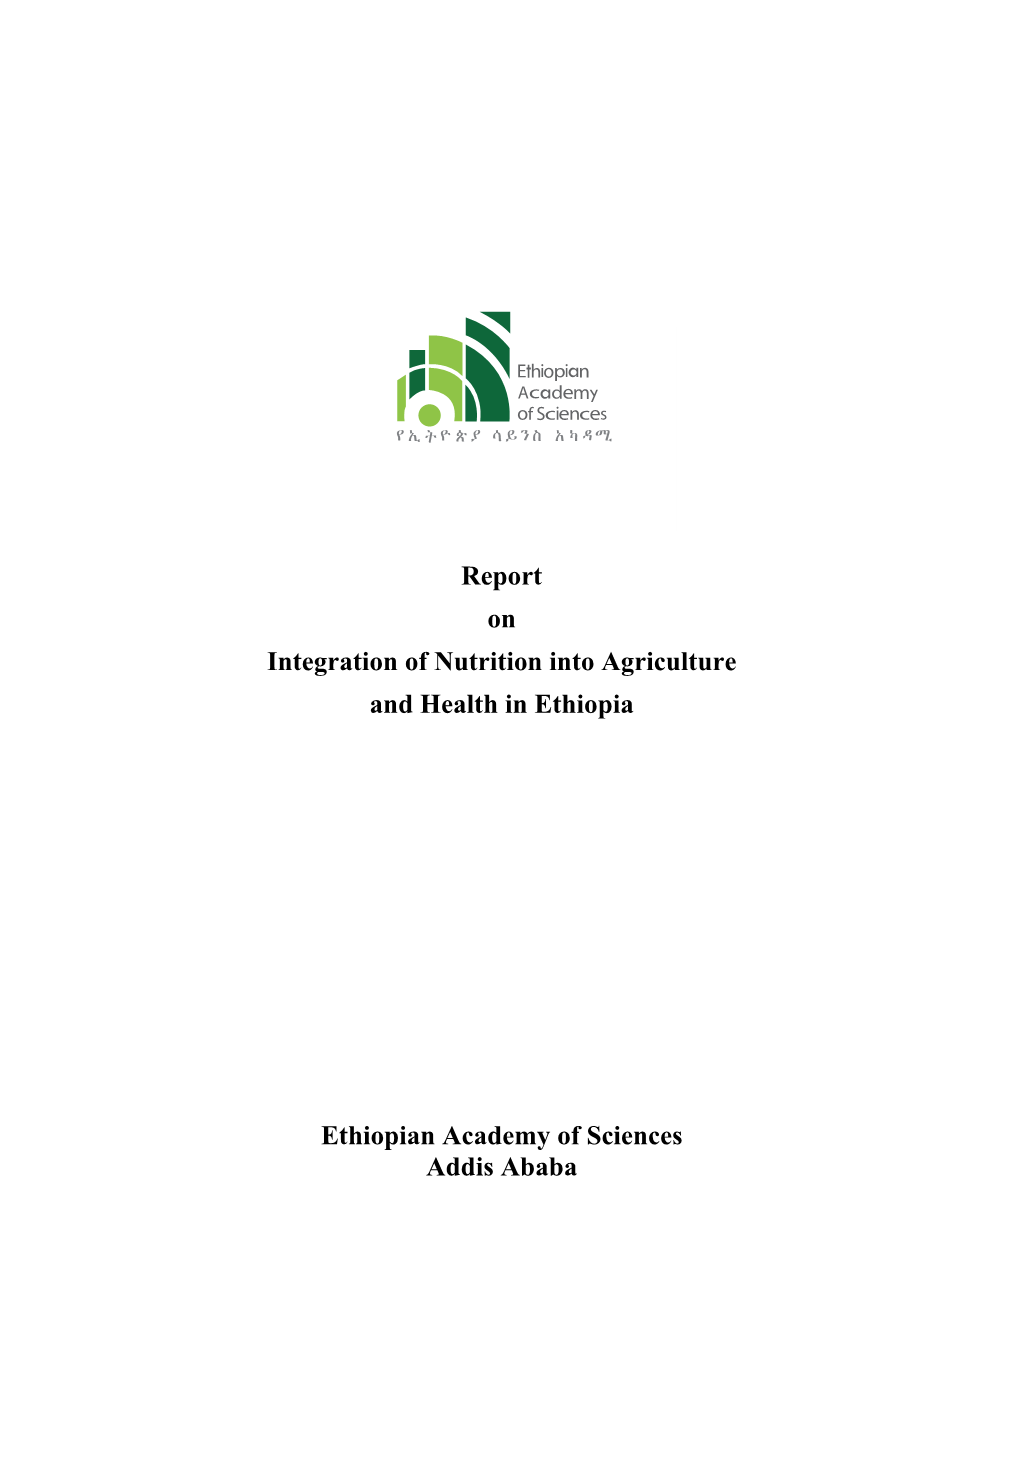 Report on Integration of Nutrition Into Agriculture and Health in Ethiopia